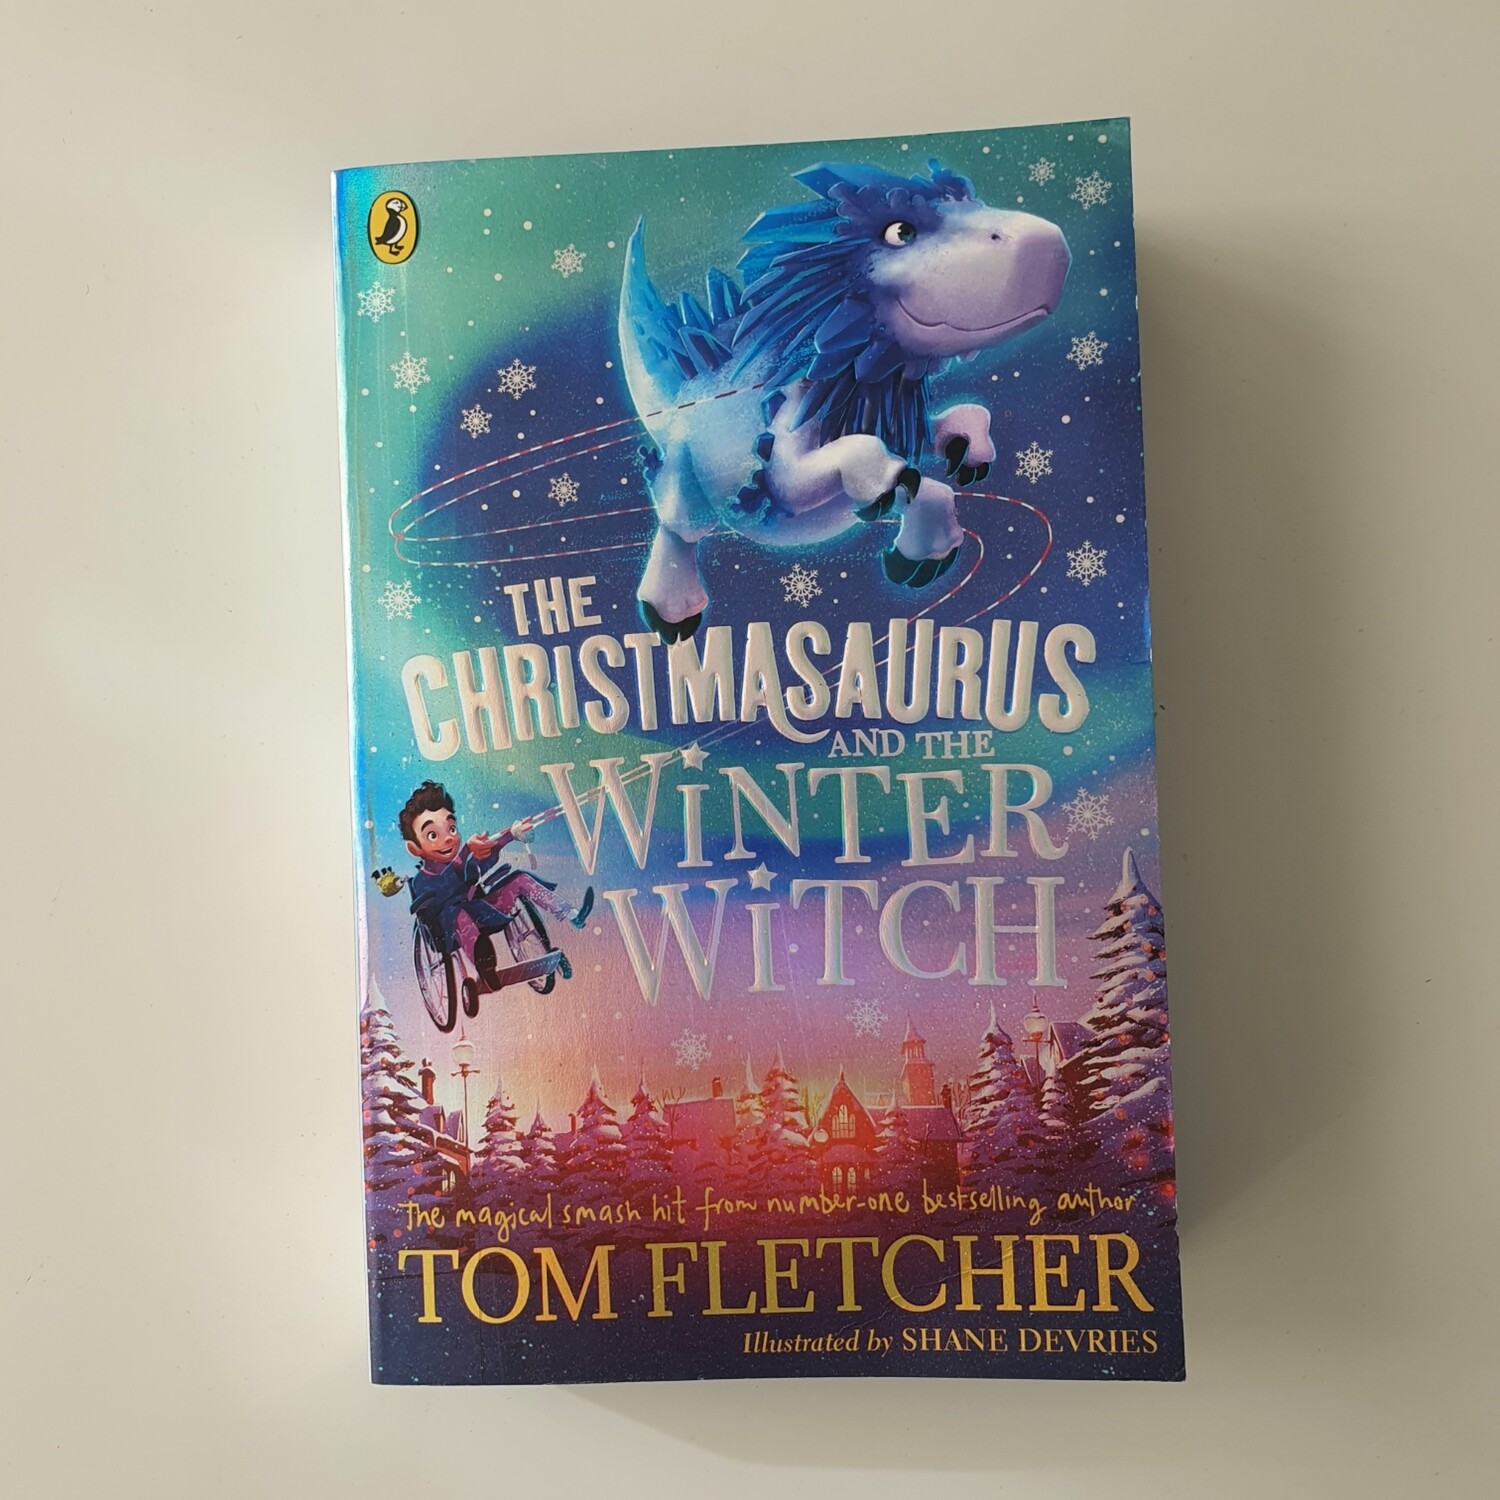 Christmasaurus and the Winter Witch Notebook - made from a paperback book